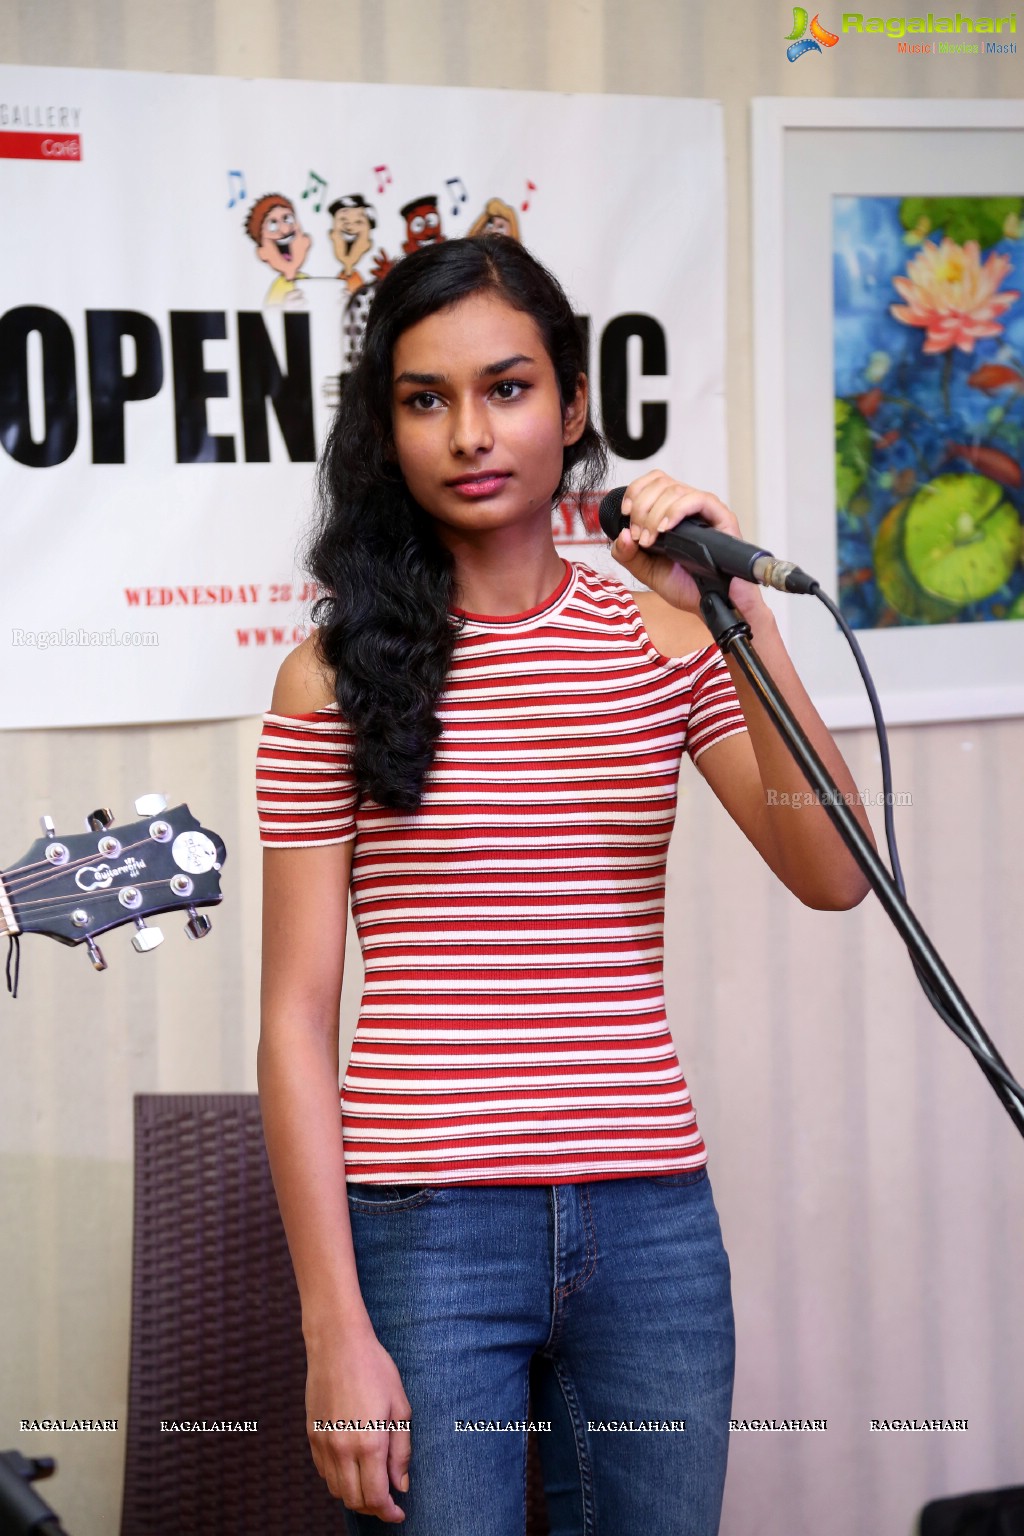 Open Mic Bollywood at The Gallery Cafe